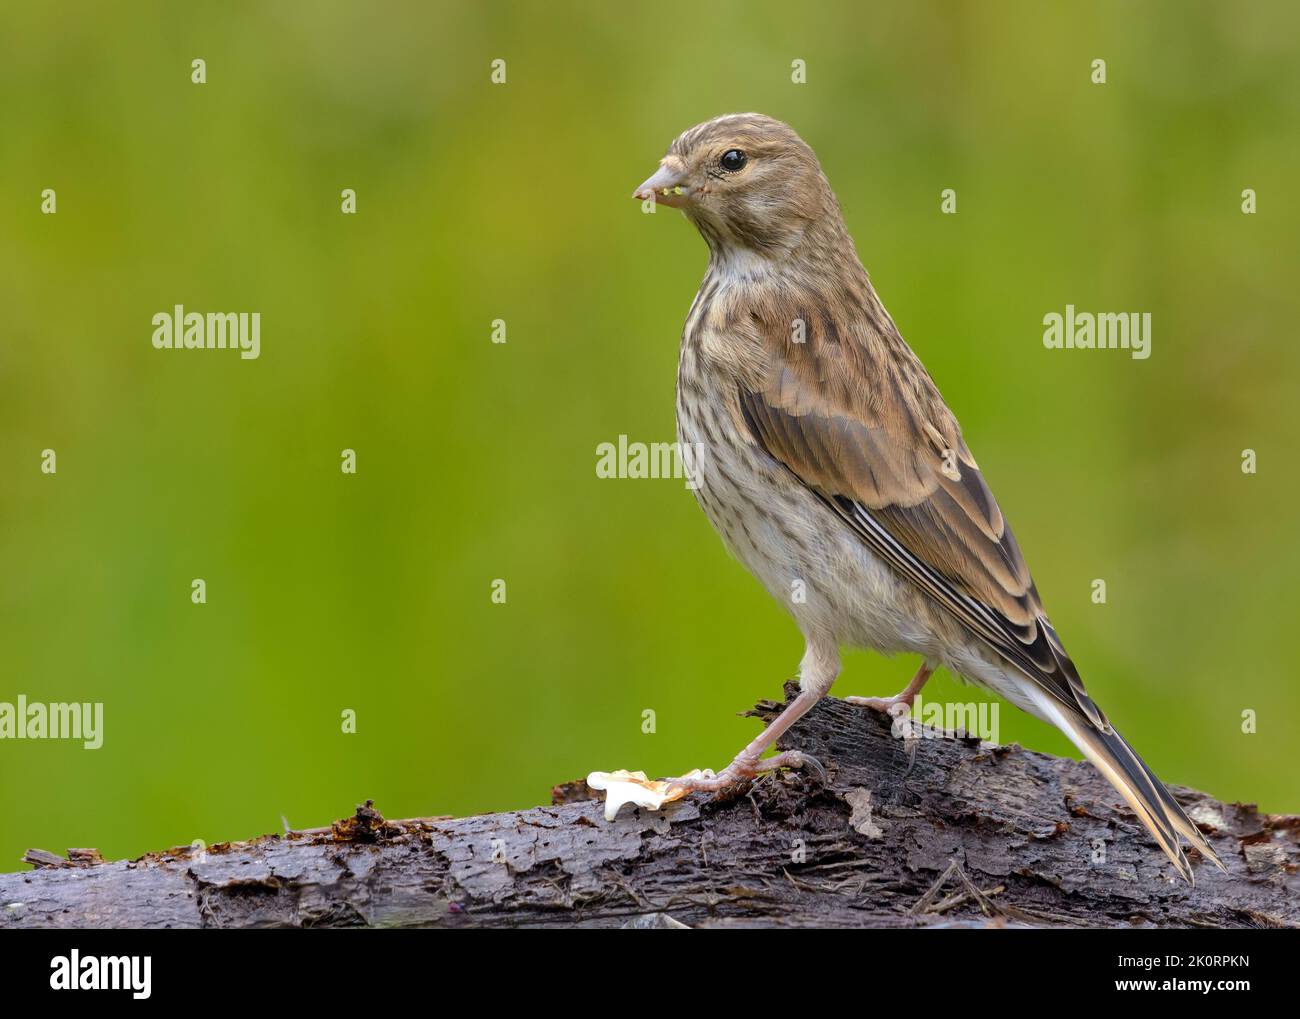 Female Common linnet (Linaria cannabina) posing on a tree bark trunk with green background Stock Photo